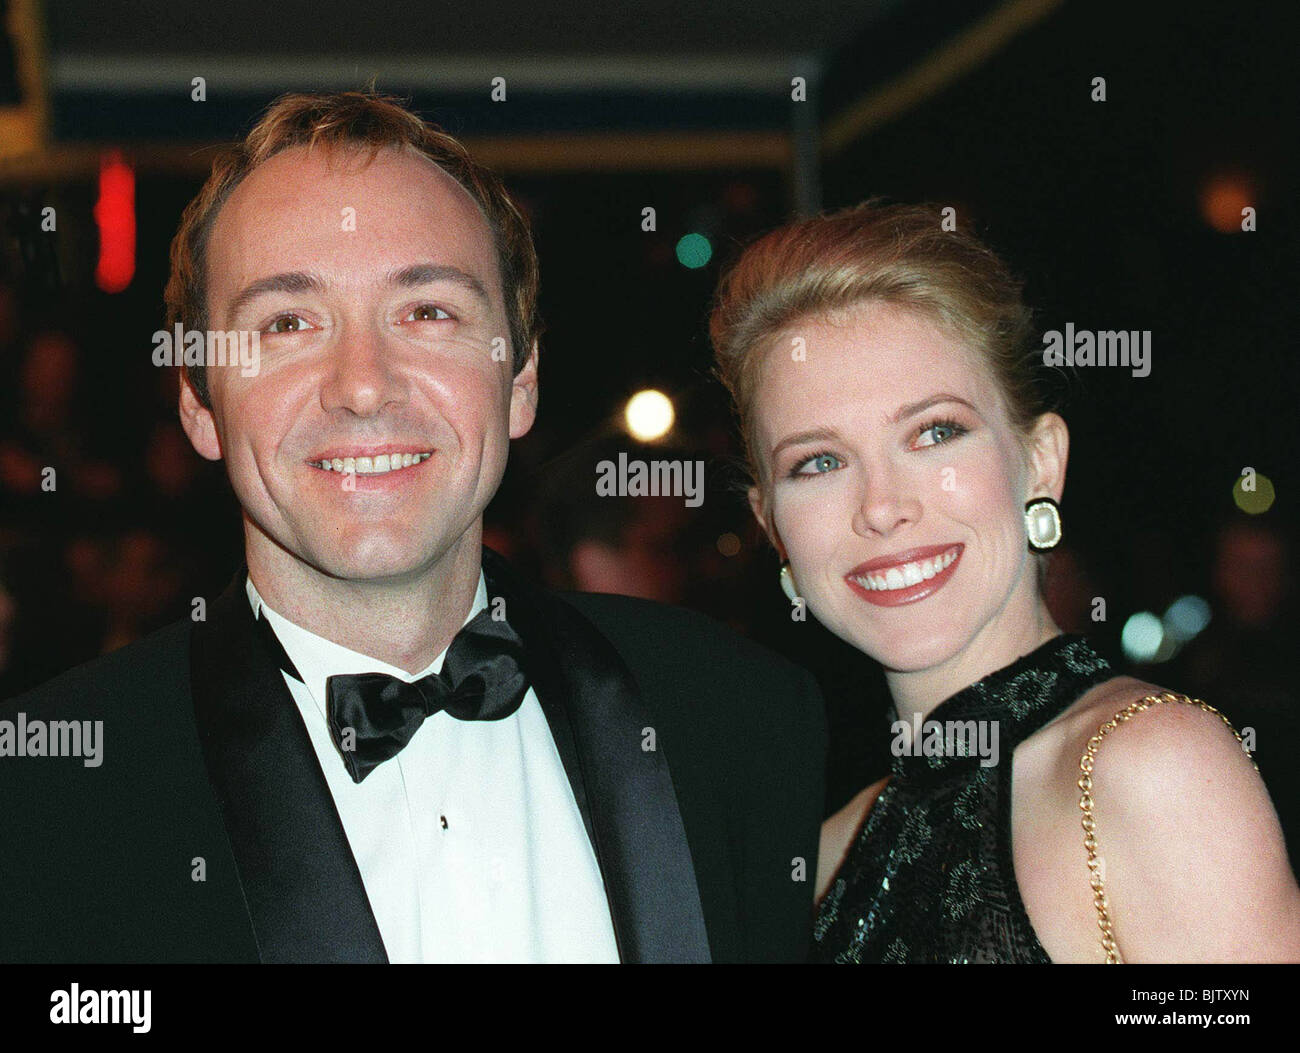 KEVIN SPACEY & WIFE 03 February 1997 Stock Photo Alamy